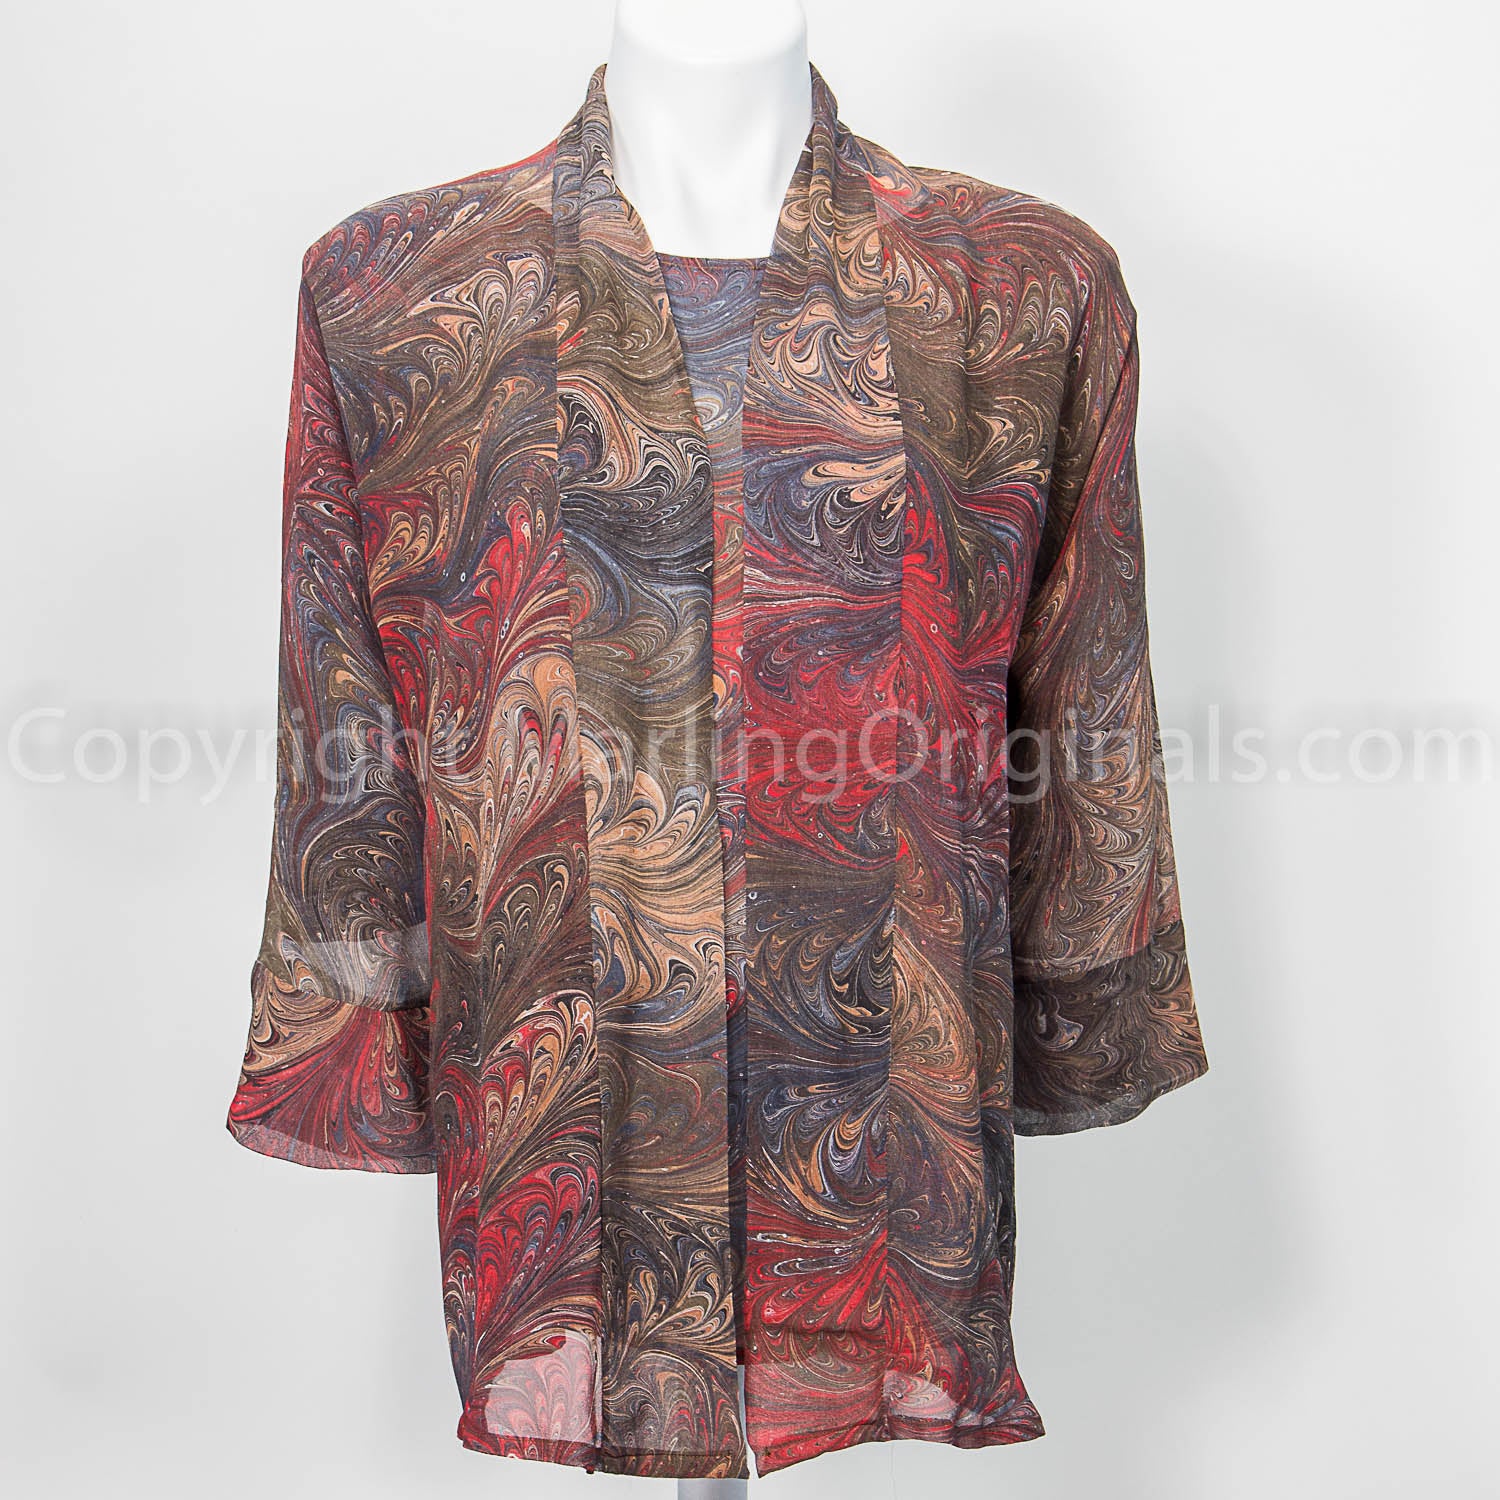 marbled silk top with matching sheer kimono jacket in tones of brown, charcoal and red.